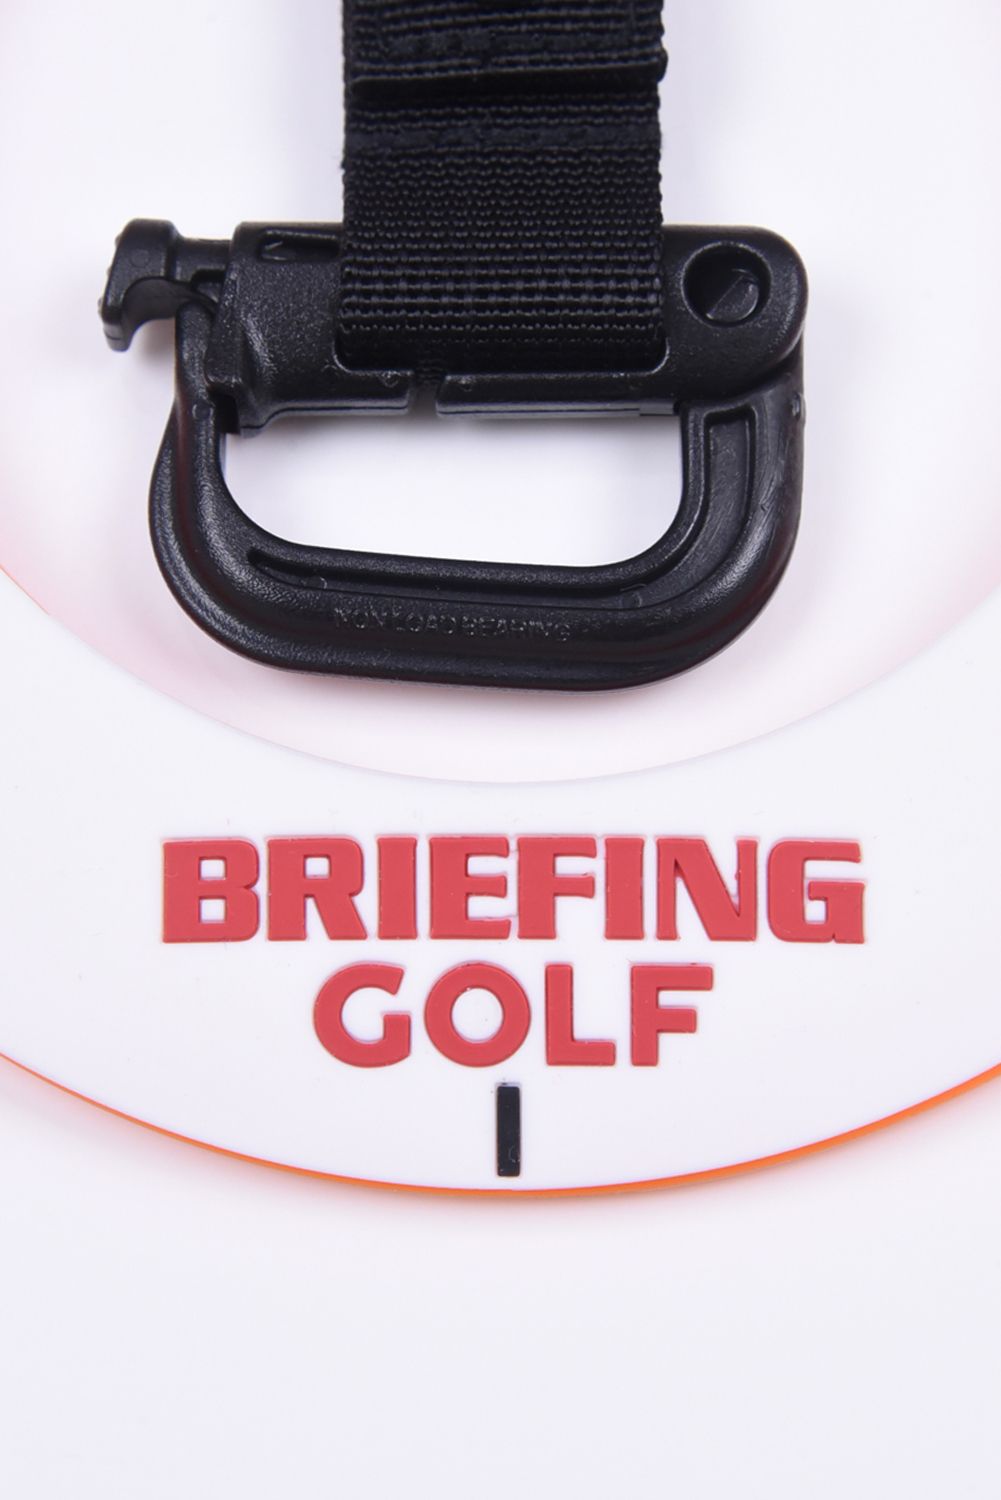 BRIEFING - 【プレゼント好適品】 PUTTING CUP SET / パッティング